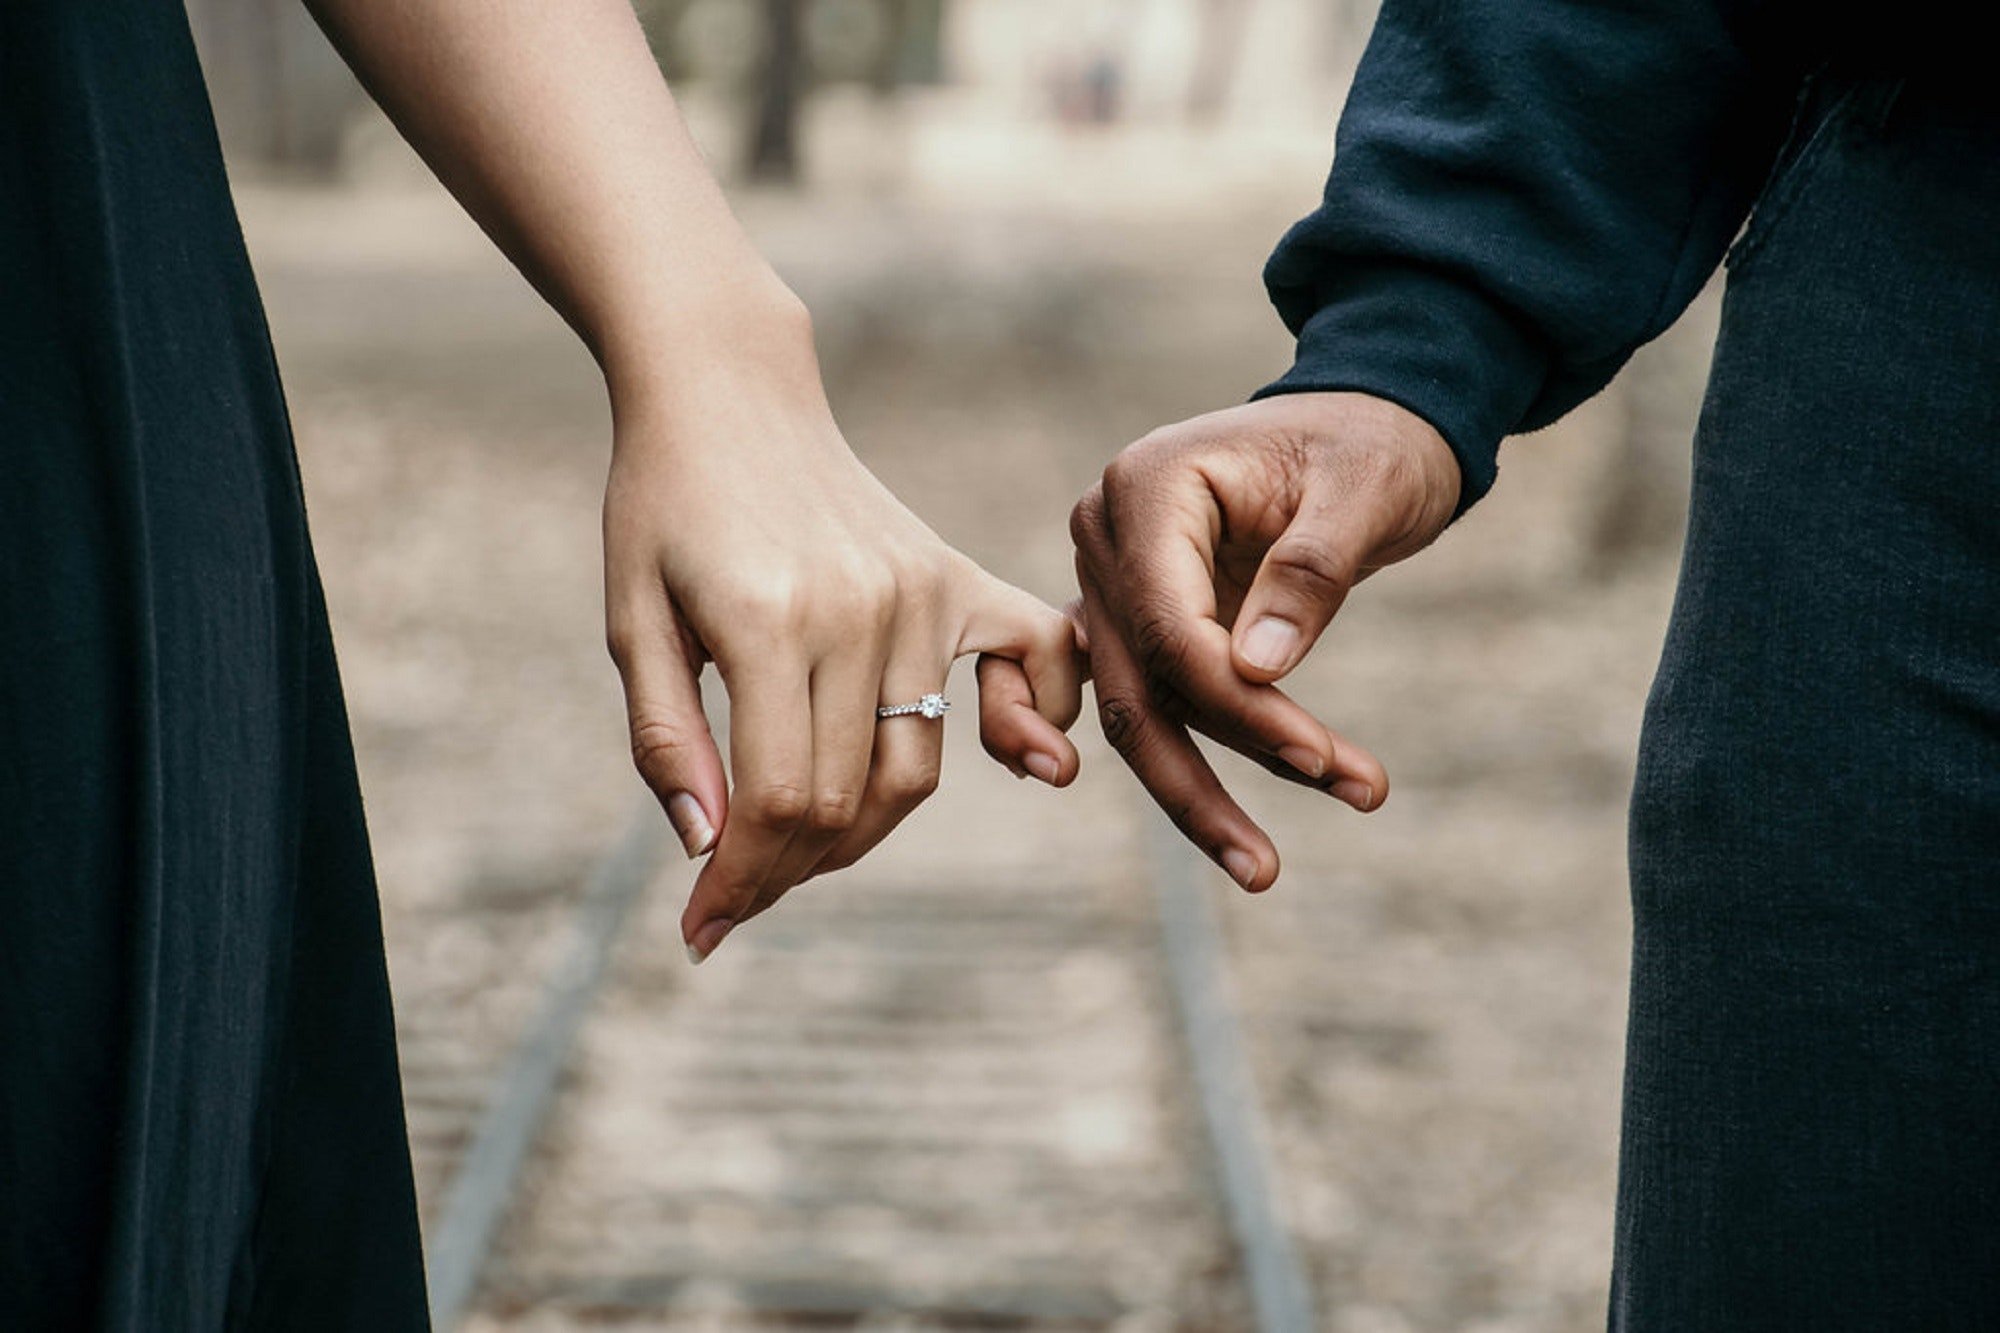 Alex and Melanie got engaged after six months of dating. | Source: Pexels